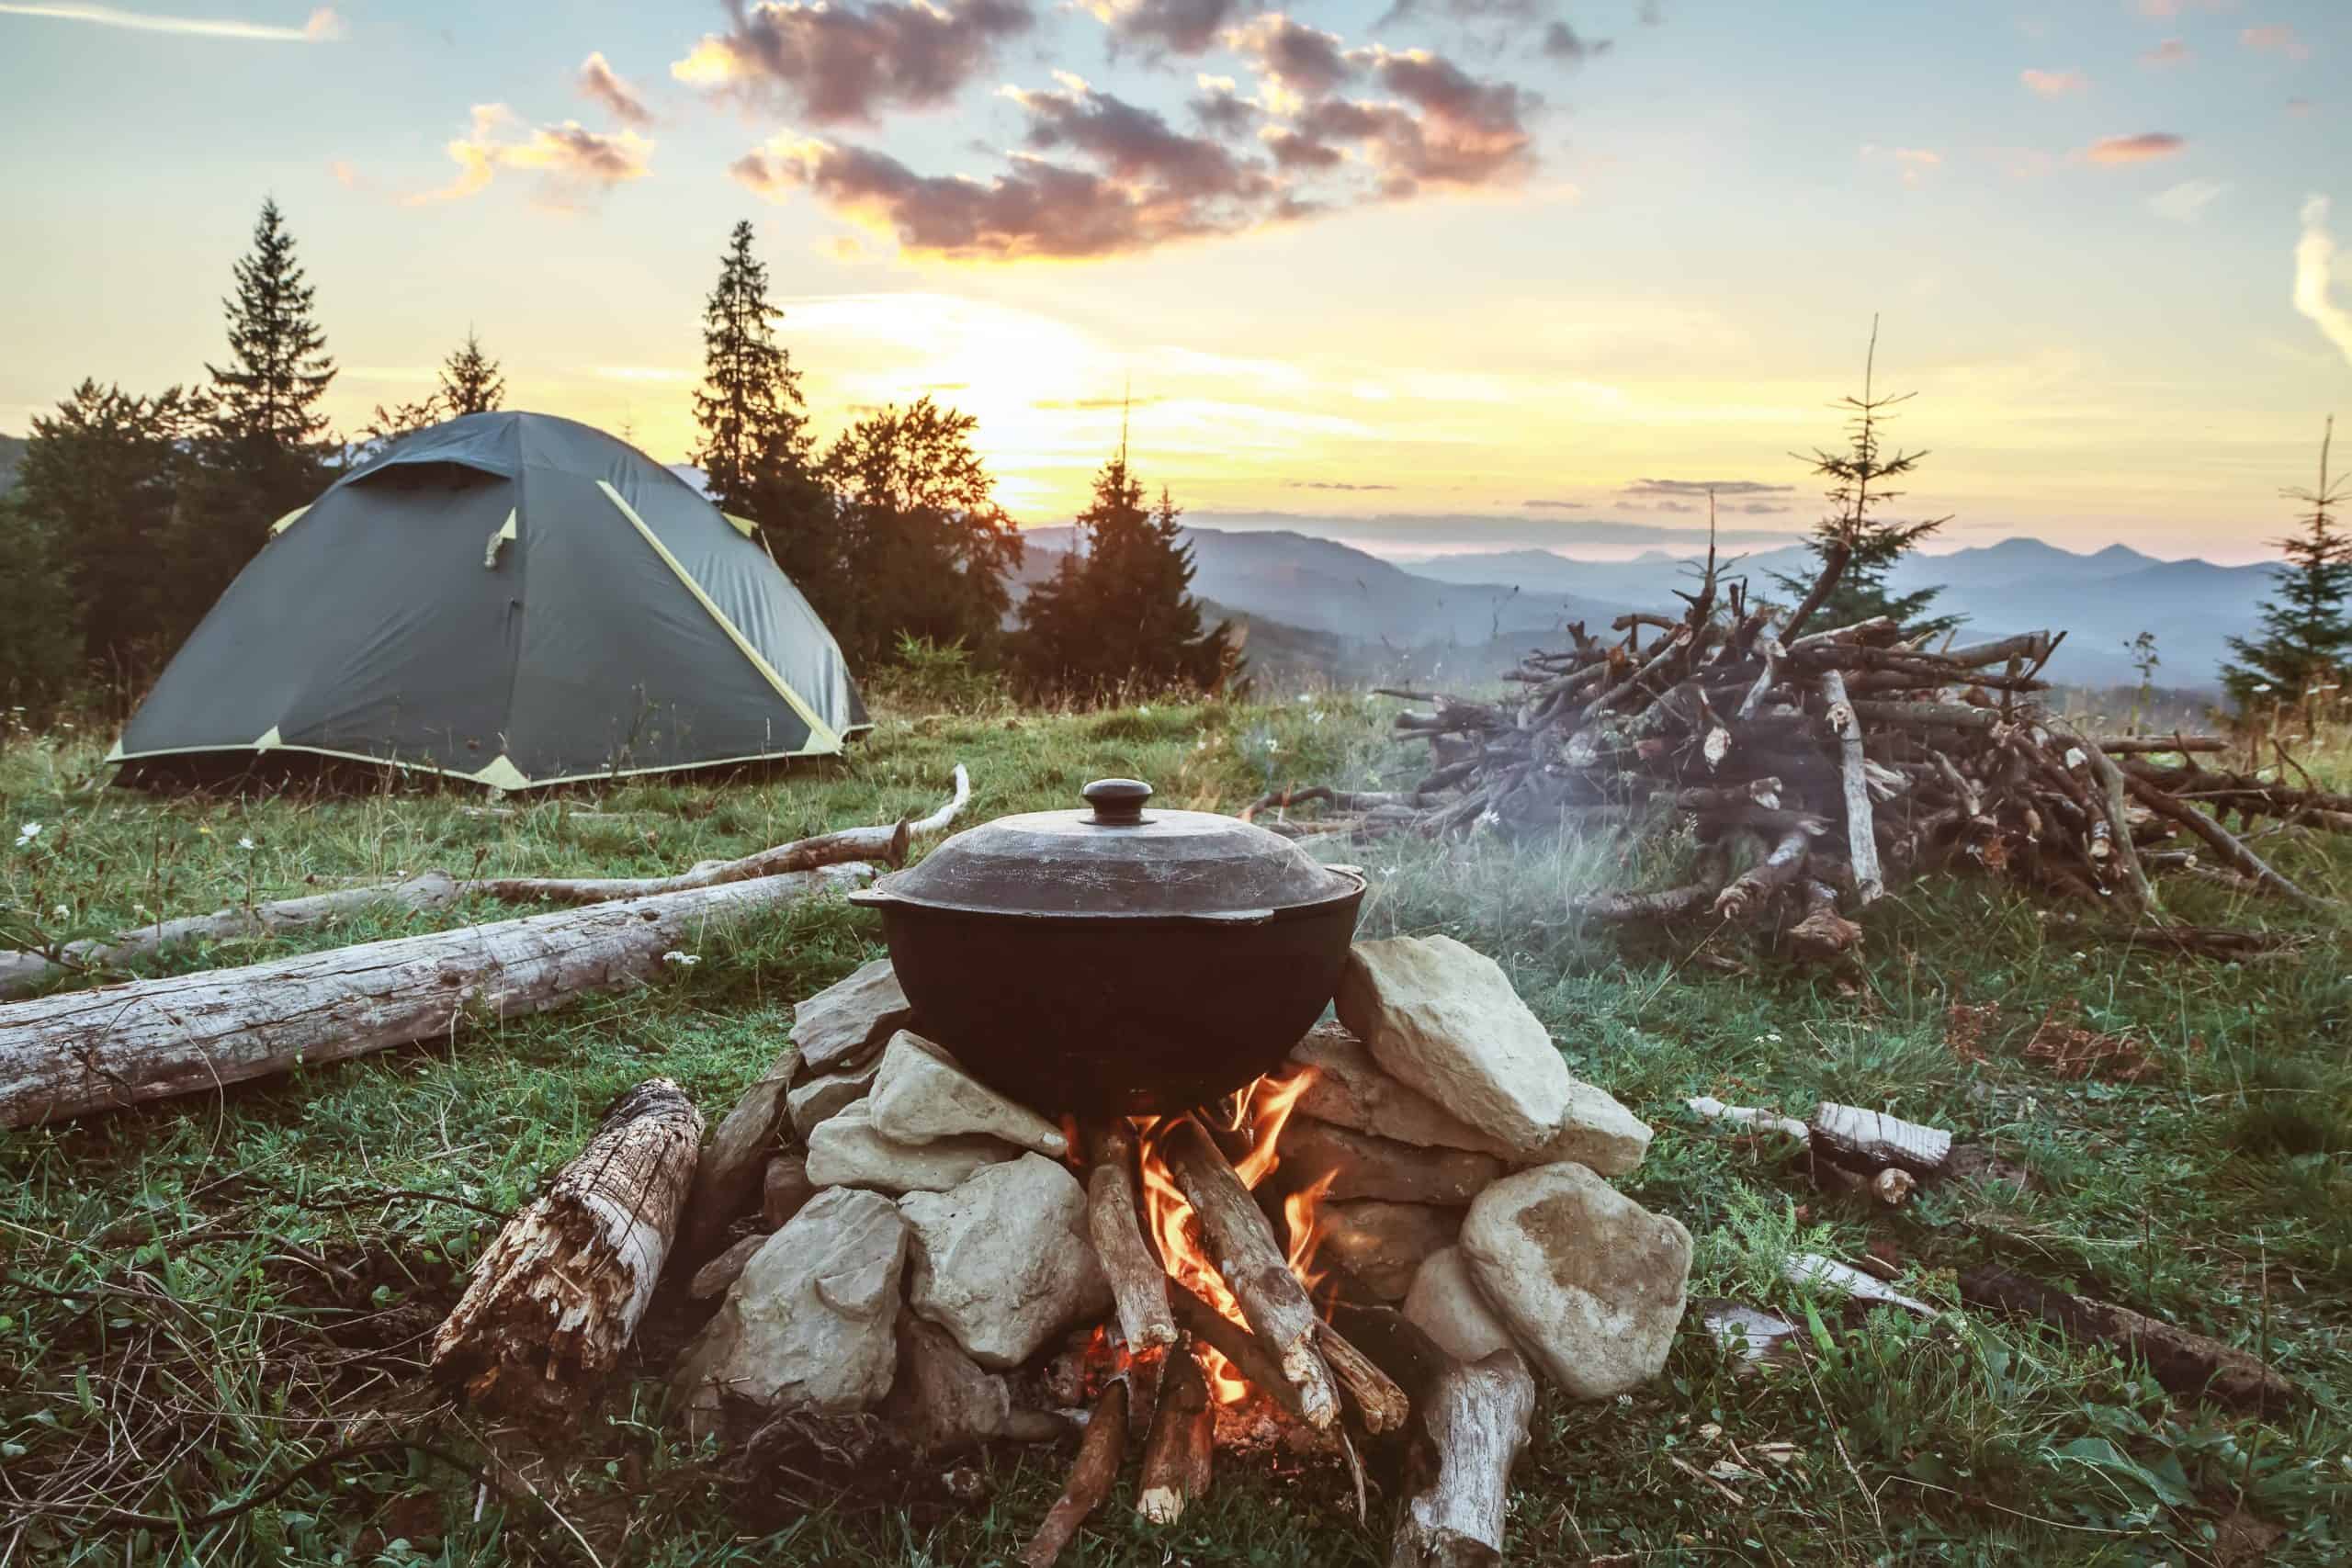 3 Very Useful Things To Have While Camping That You May Not Think Of